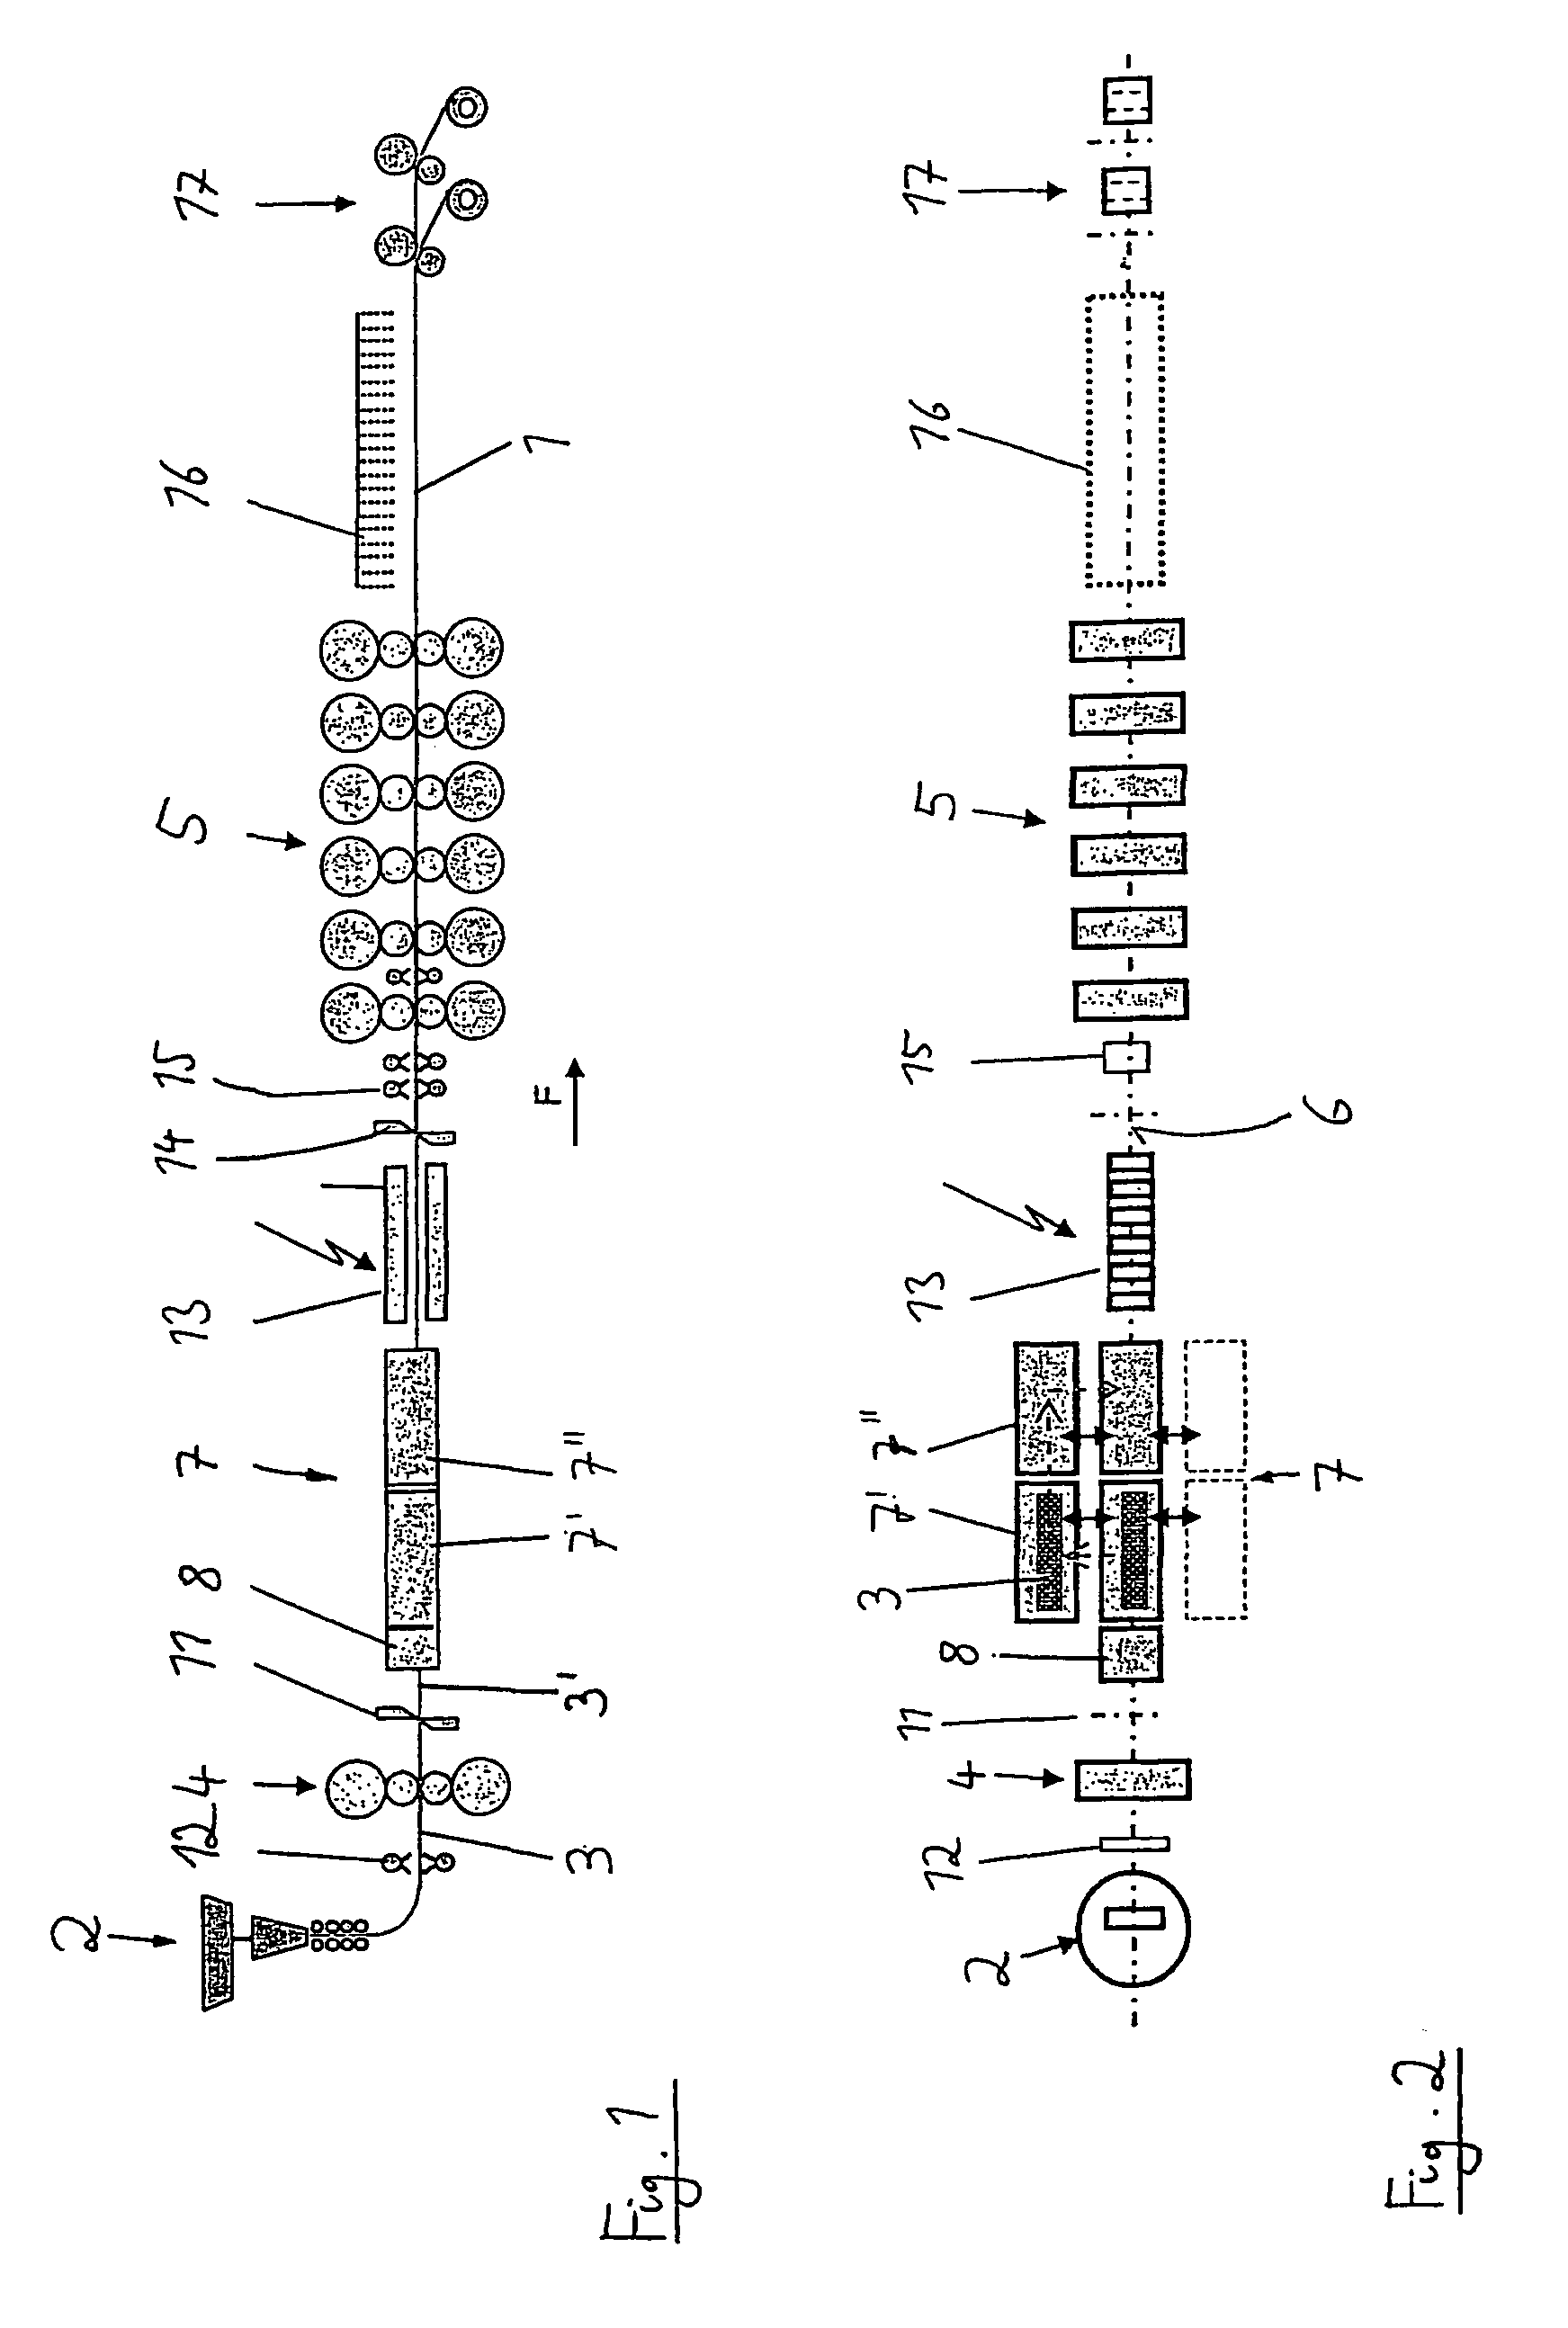 Method and device for manufacturing a metal strip by means of continuous casting and rolling